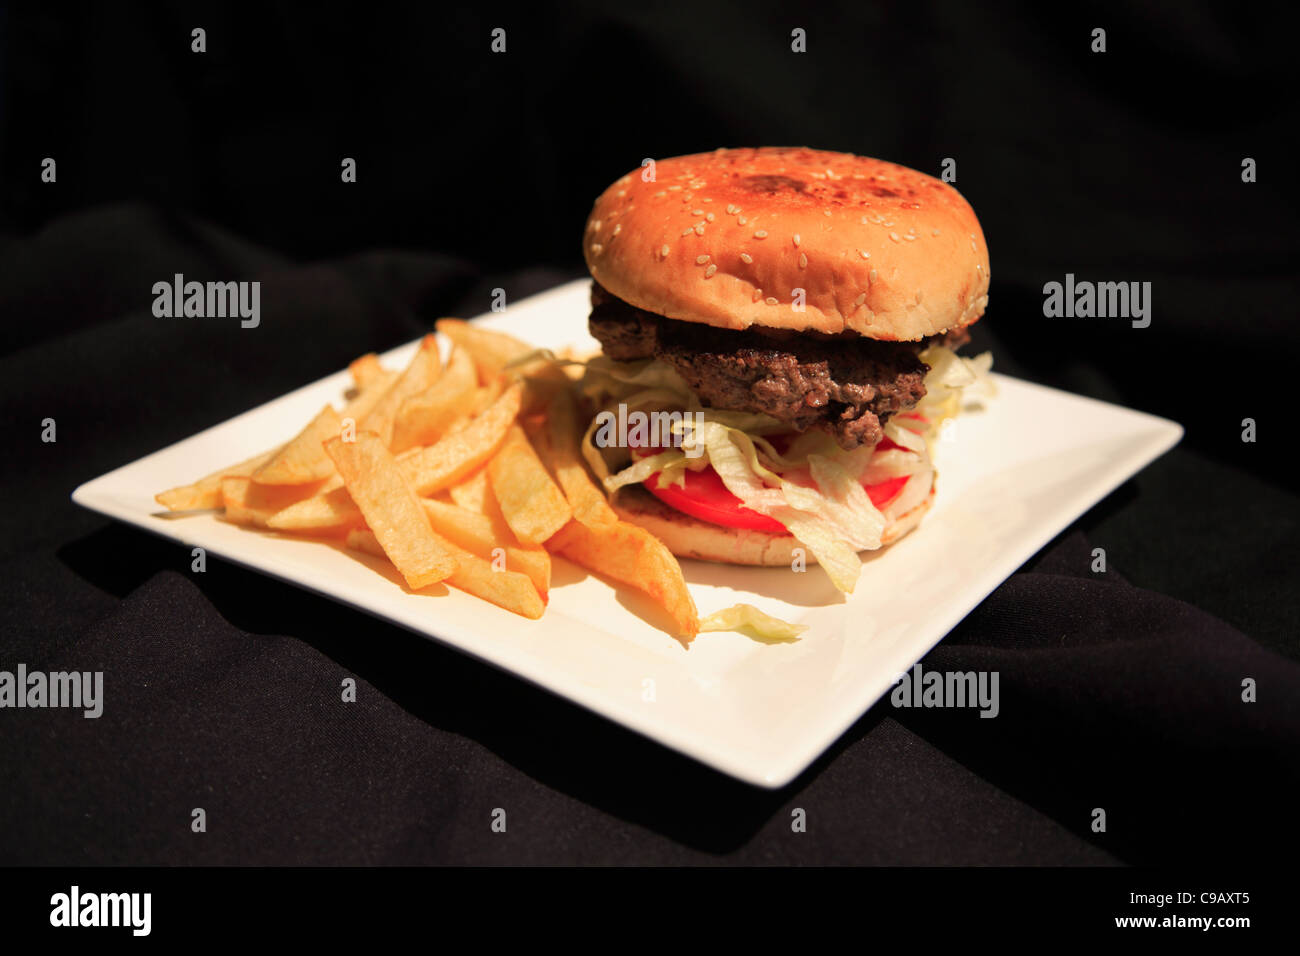 Juicy beef burger with fries on a white plate shot with a shallow depth of field Stock Photo